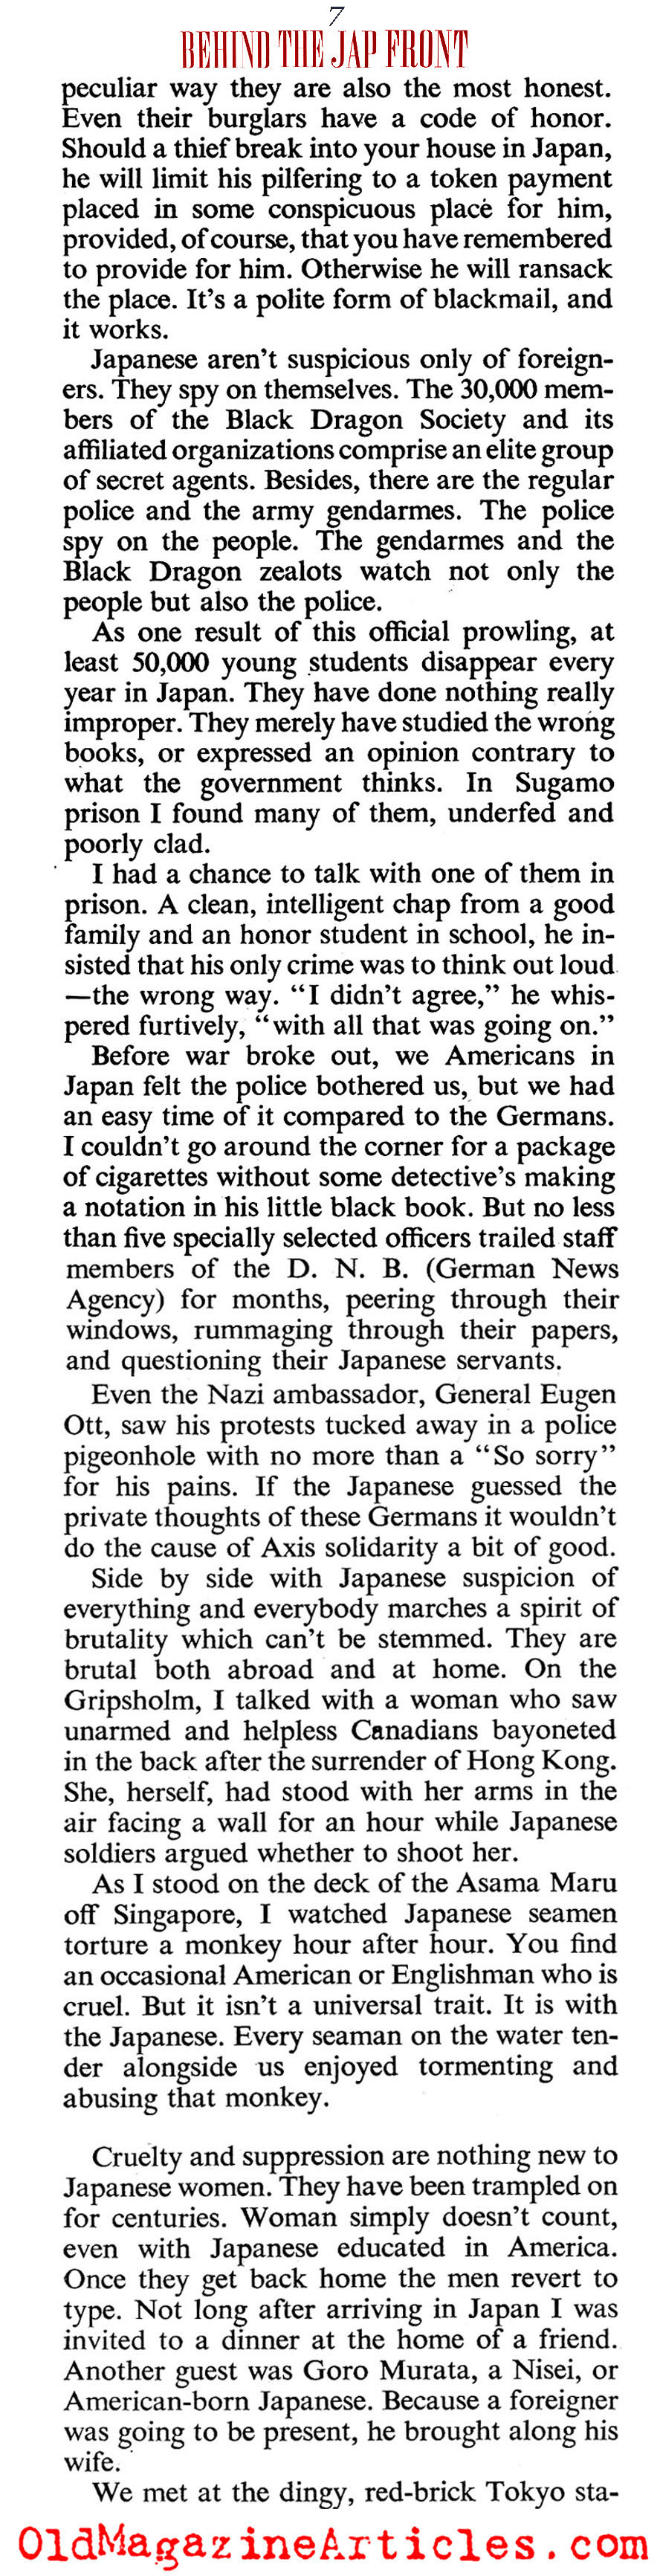 The Japanese Home Front (American Magazine, 1943)